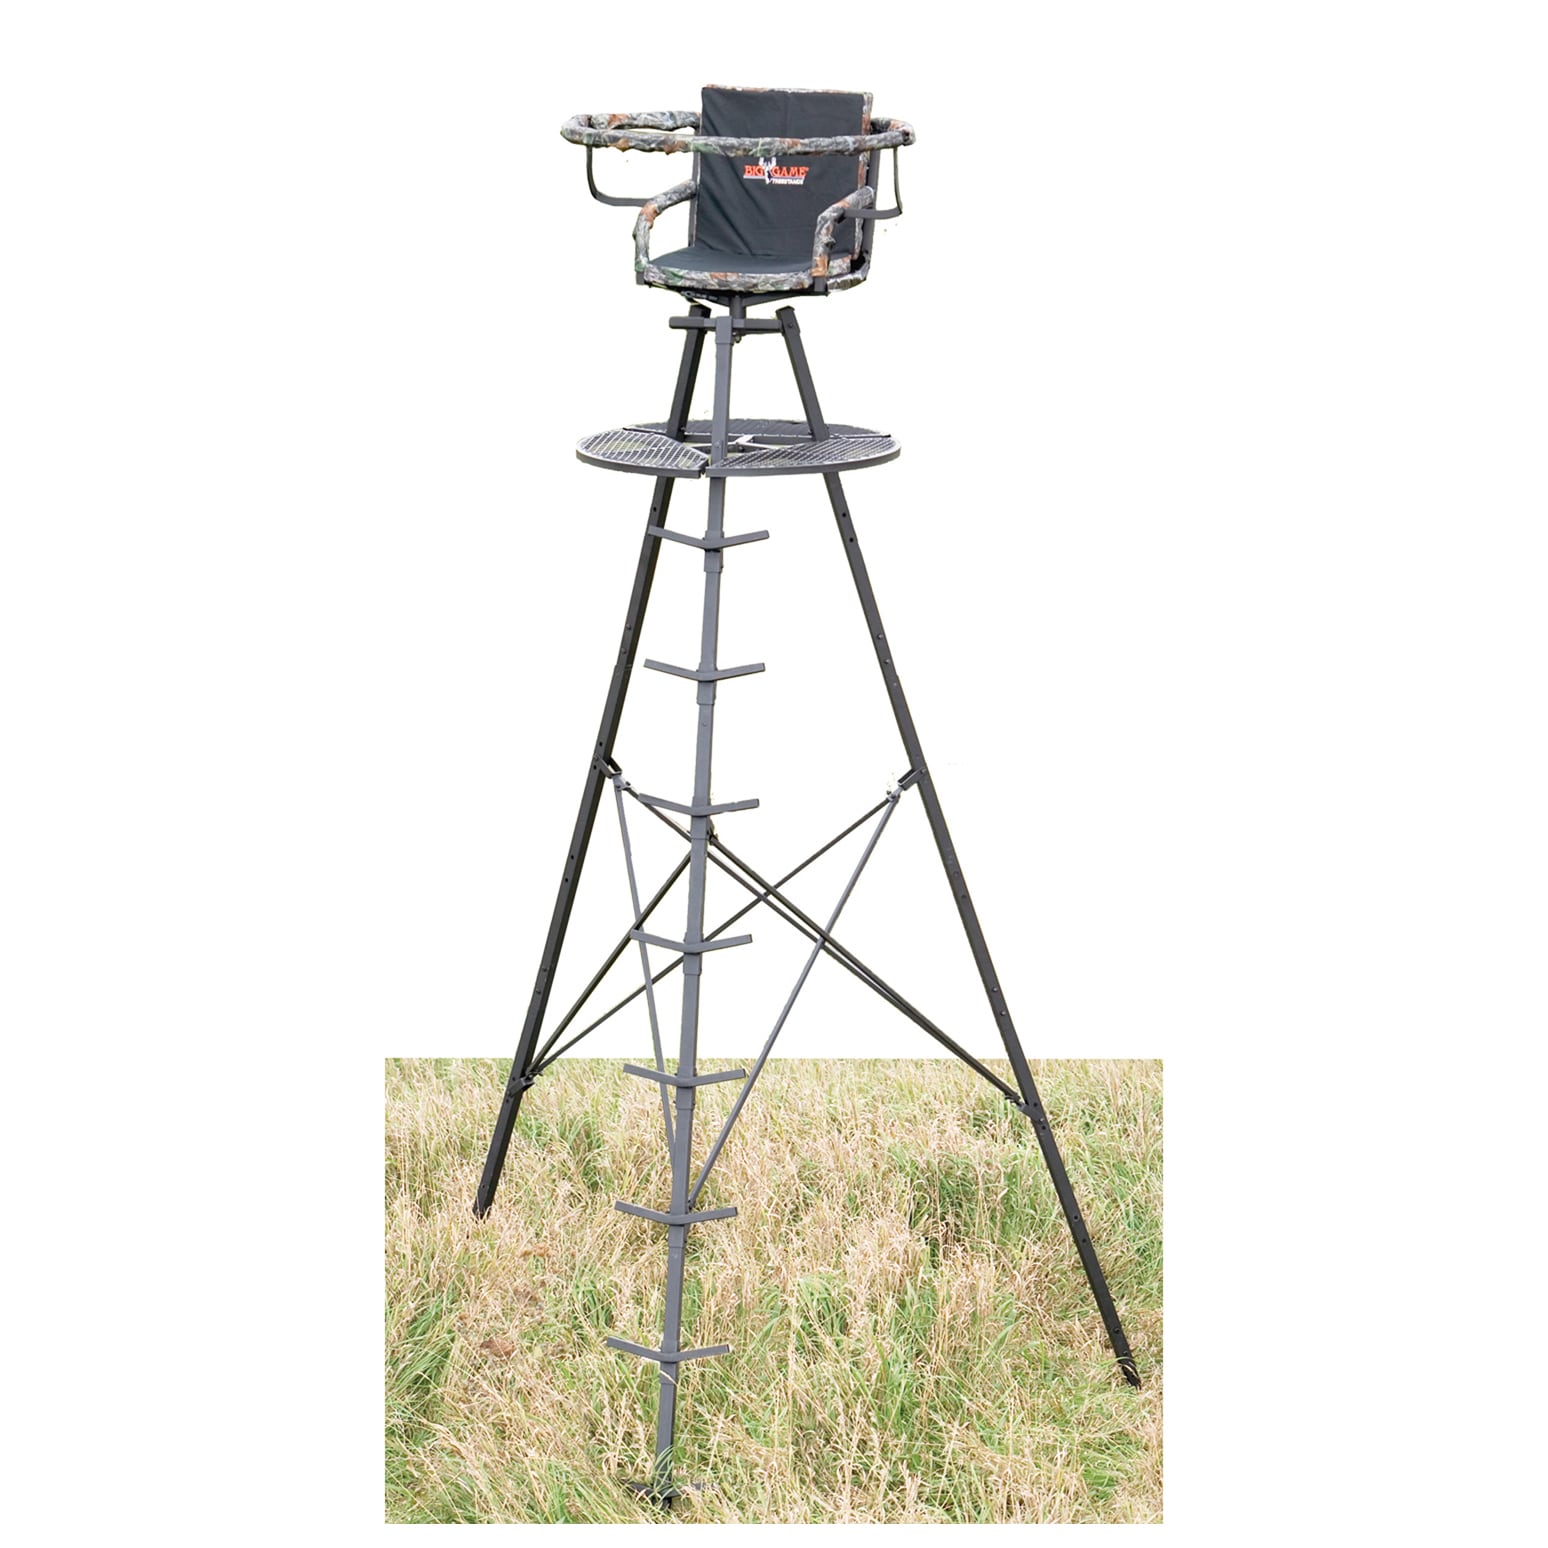 Shop Big Game 13 Foot Apex Tower Stand Overstock 7963426